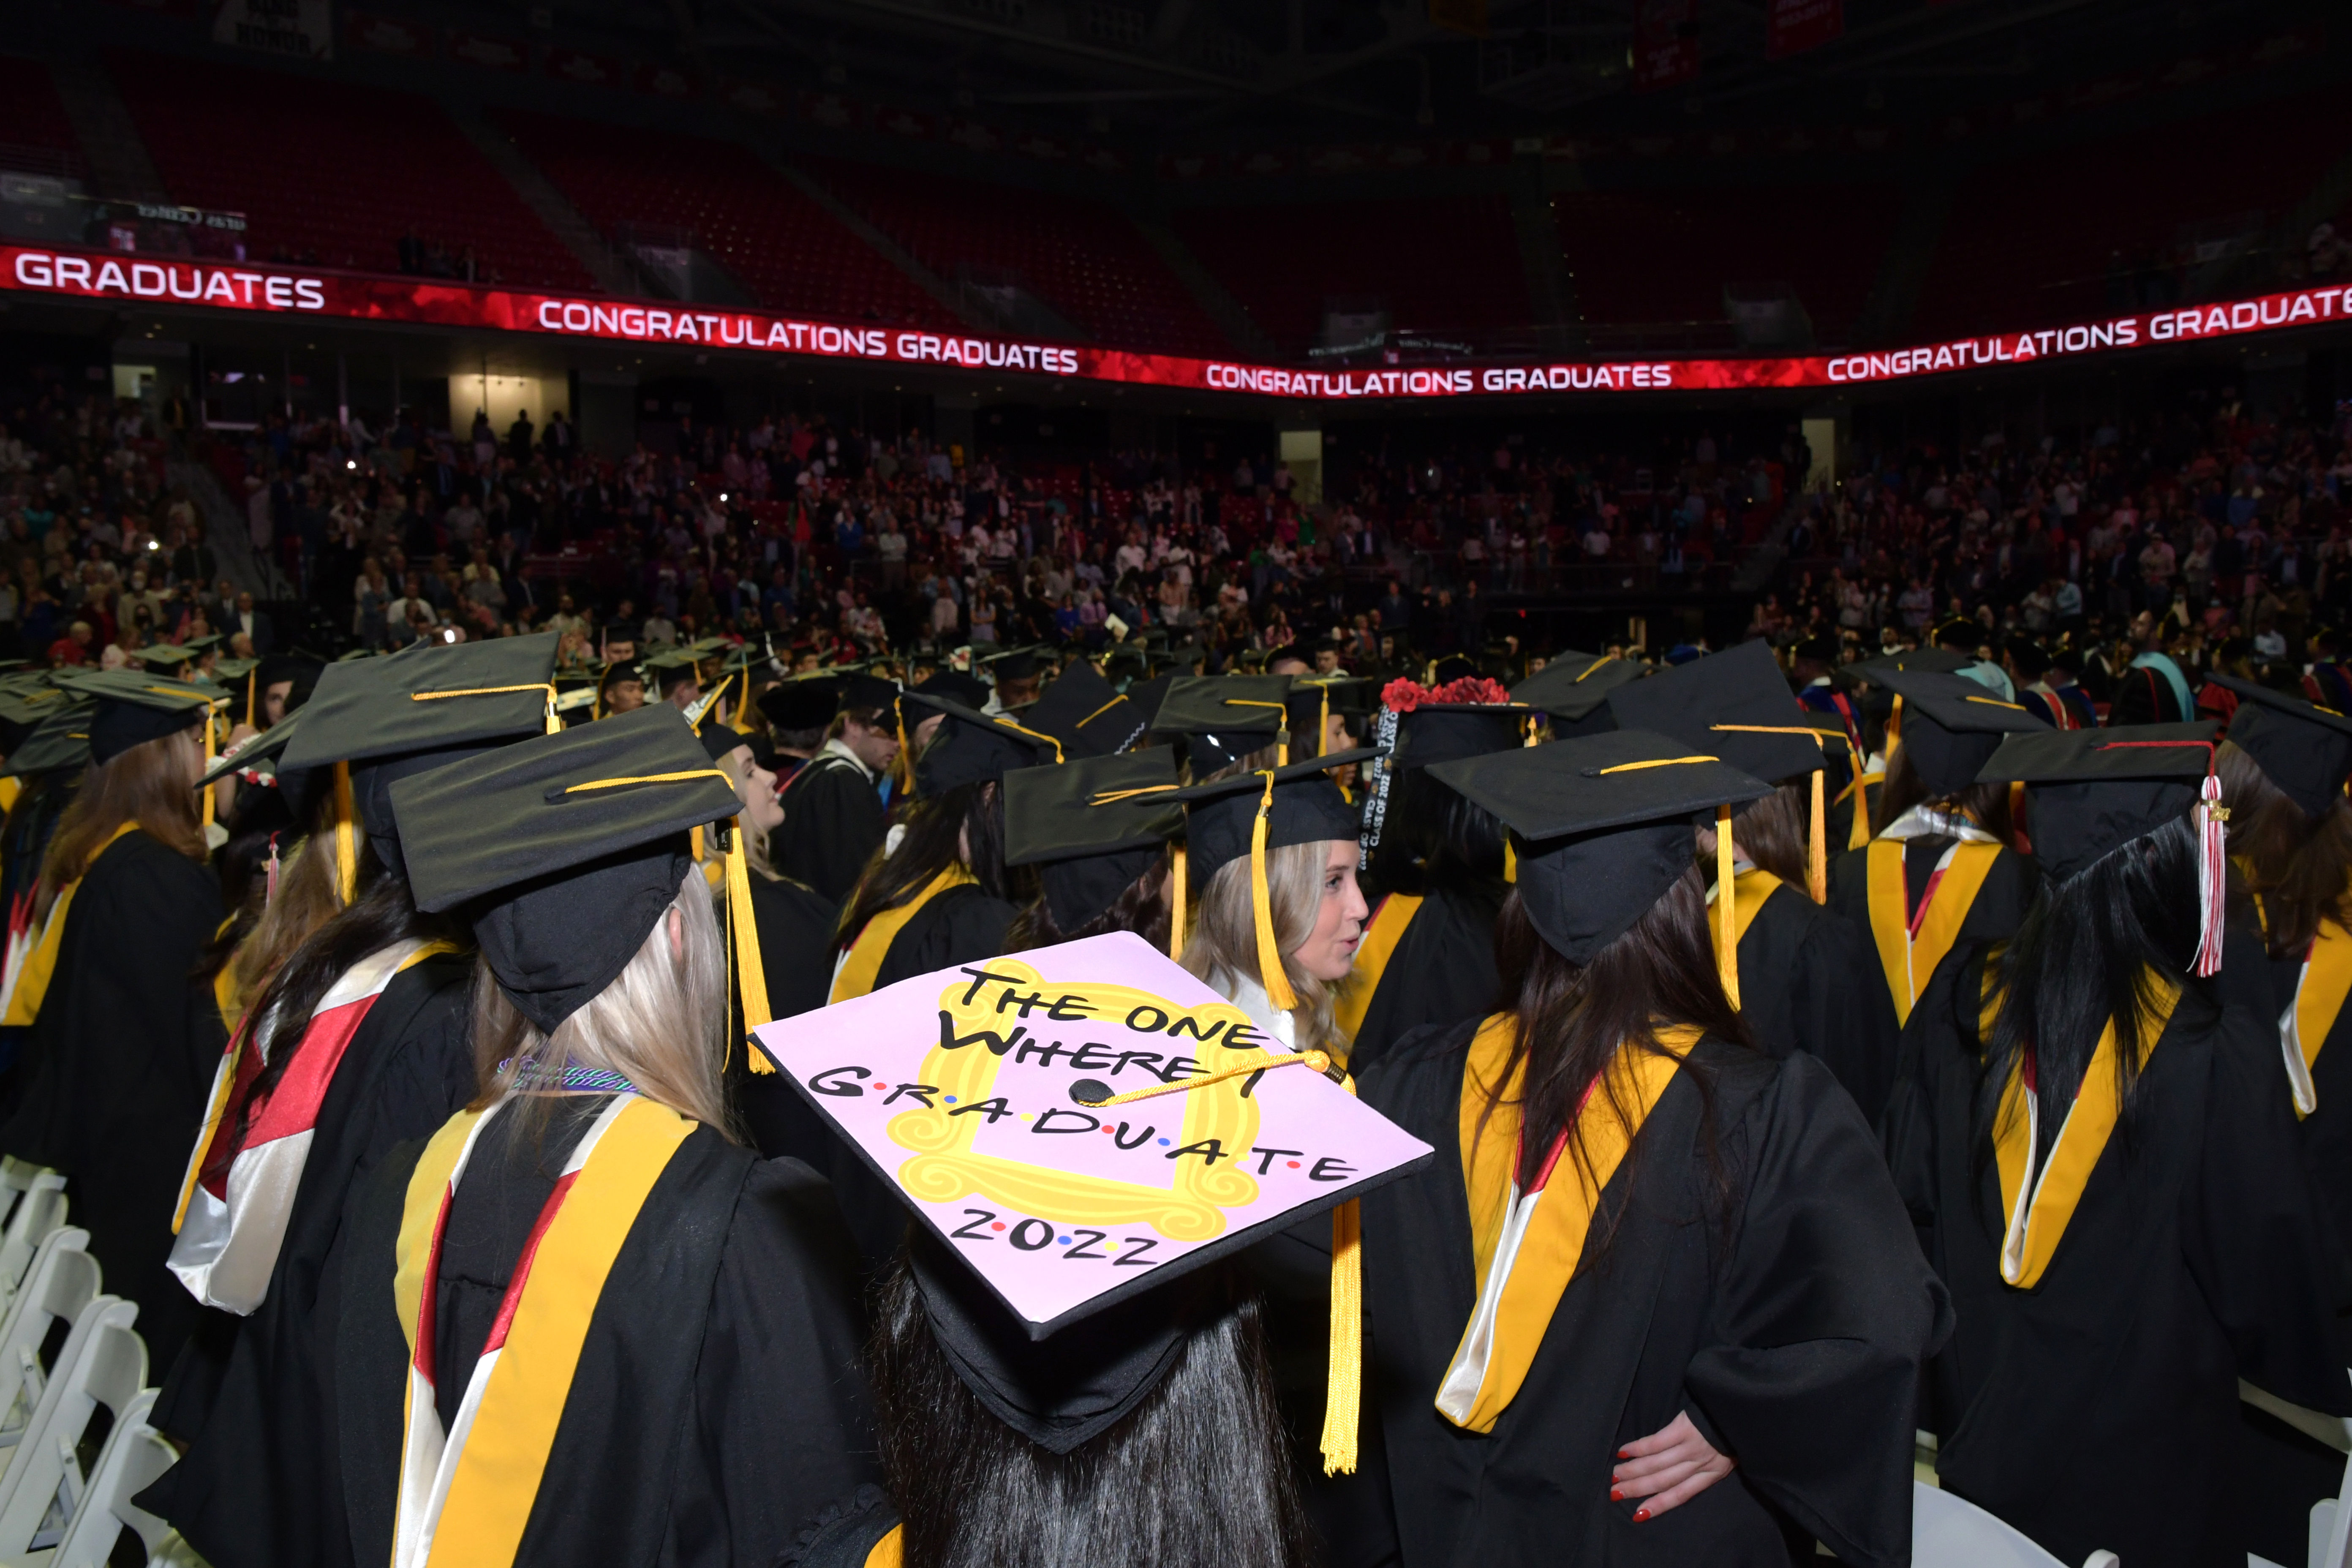 graduates with backs to camera in arena with "congratulations graduates" electronic signage